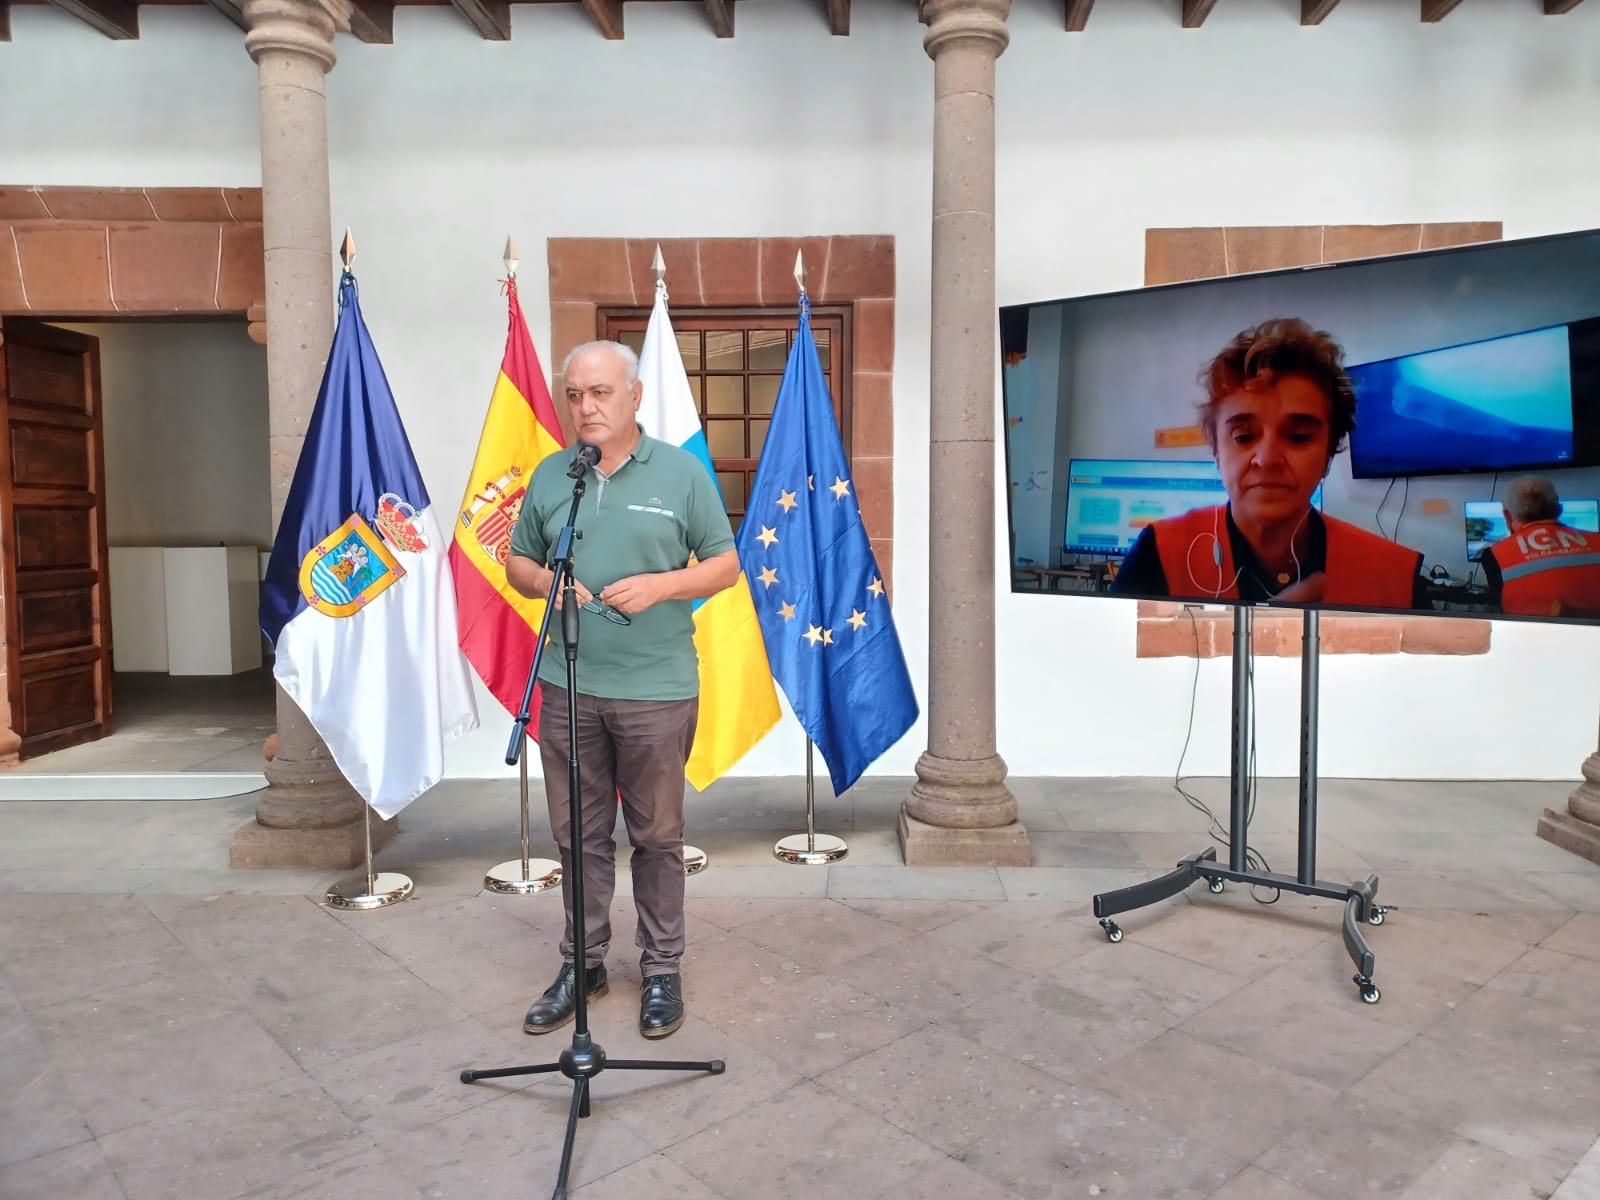 This photo was taken during the PEVOLCA public address and features Morcuende and Blanco. Sourced from Gobierno de Canarias (2021).